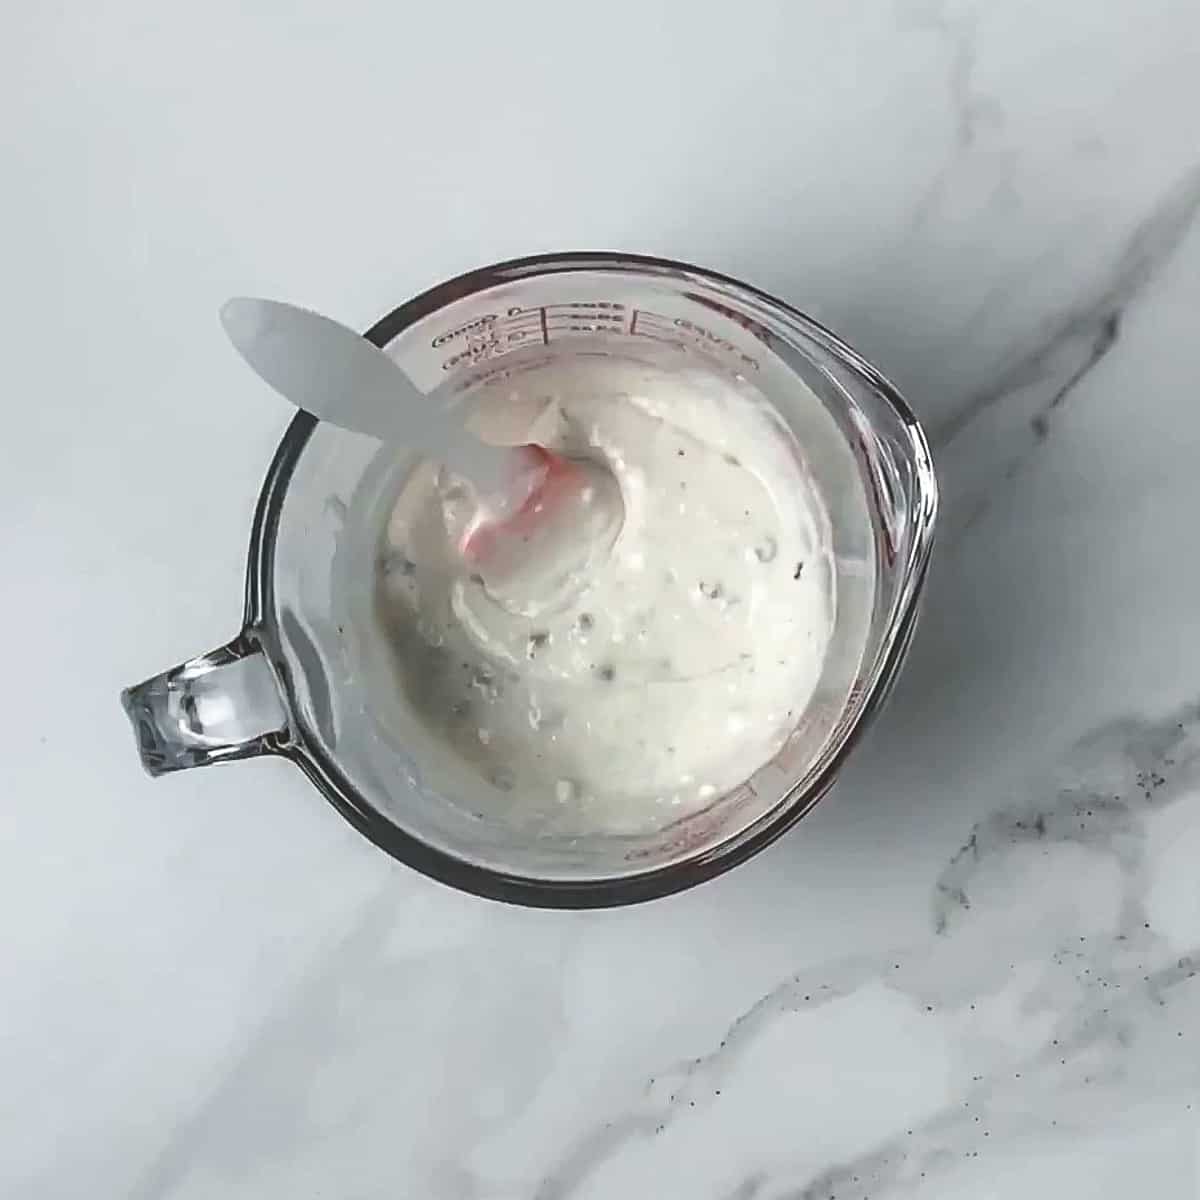 muffin batter in a measuring cup